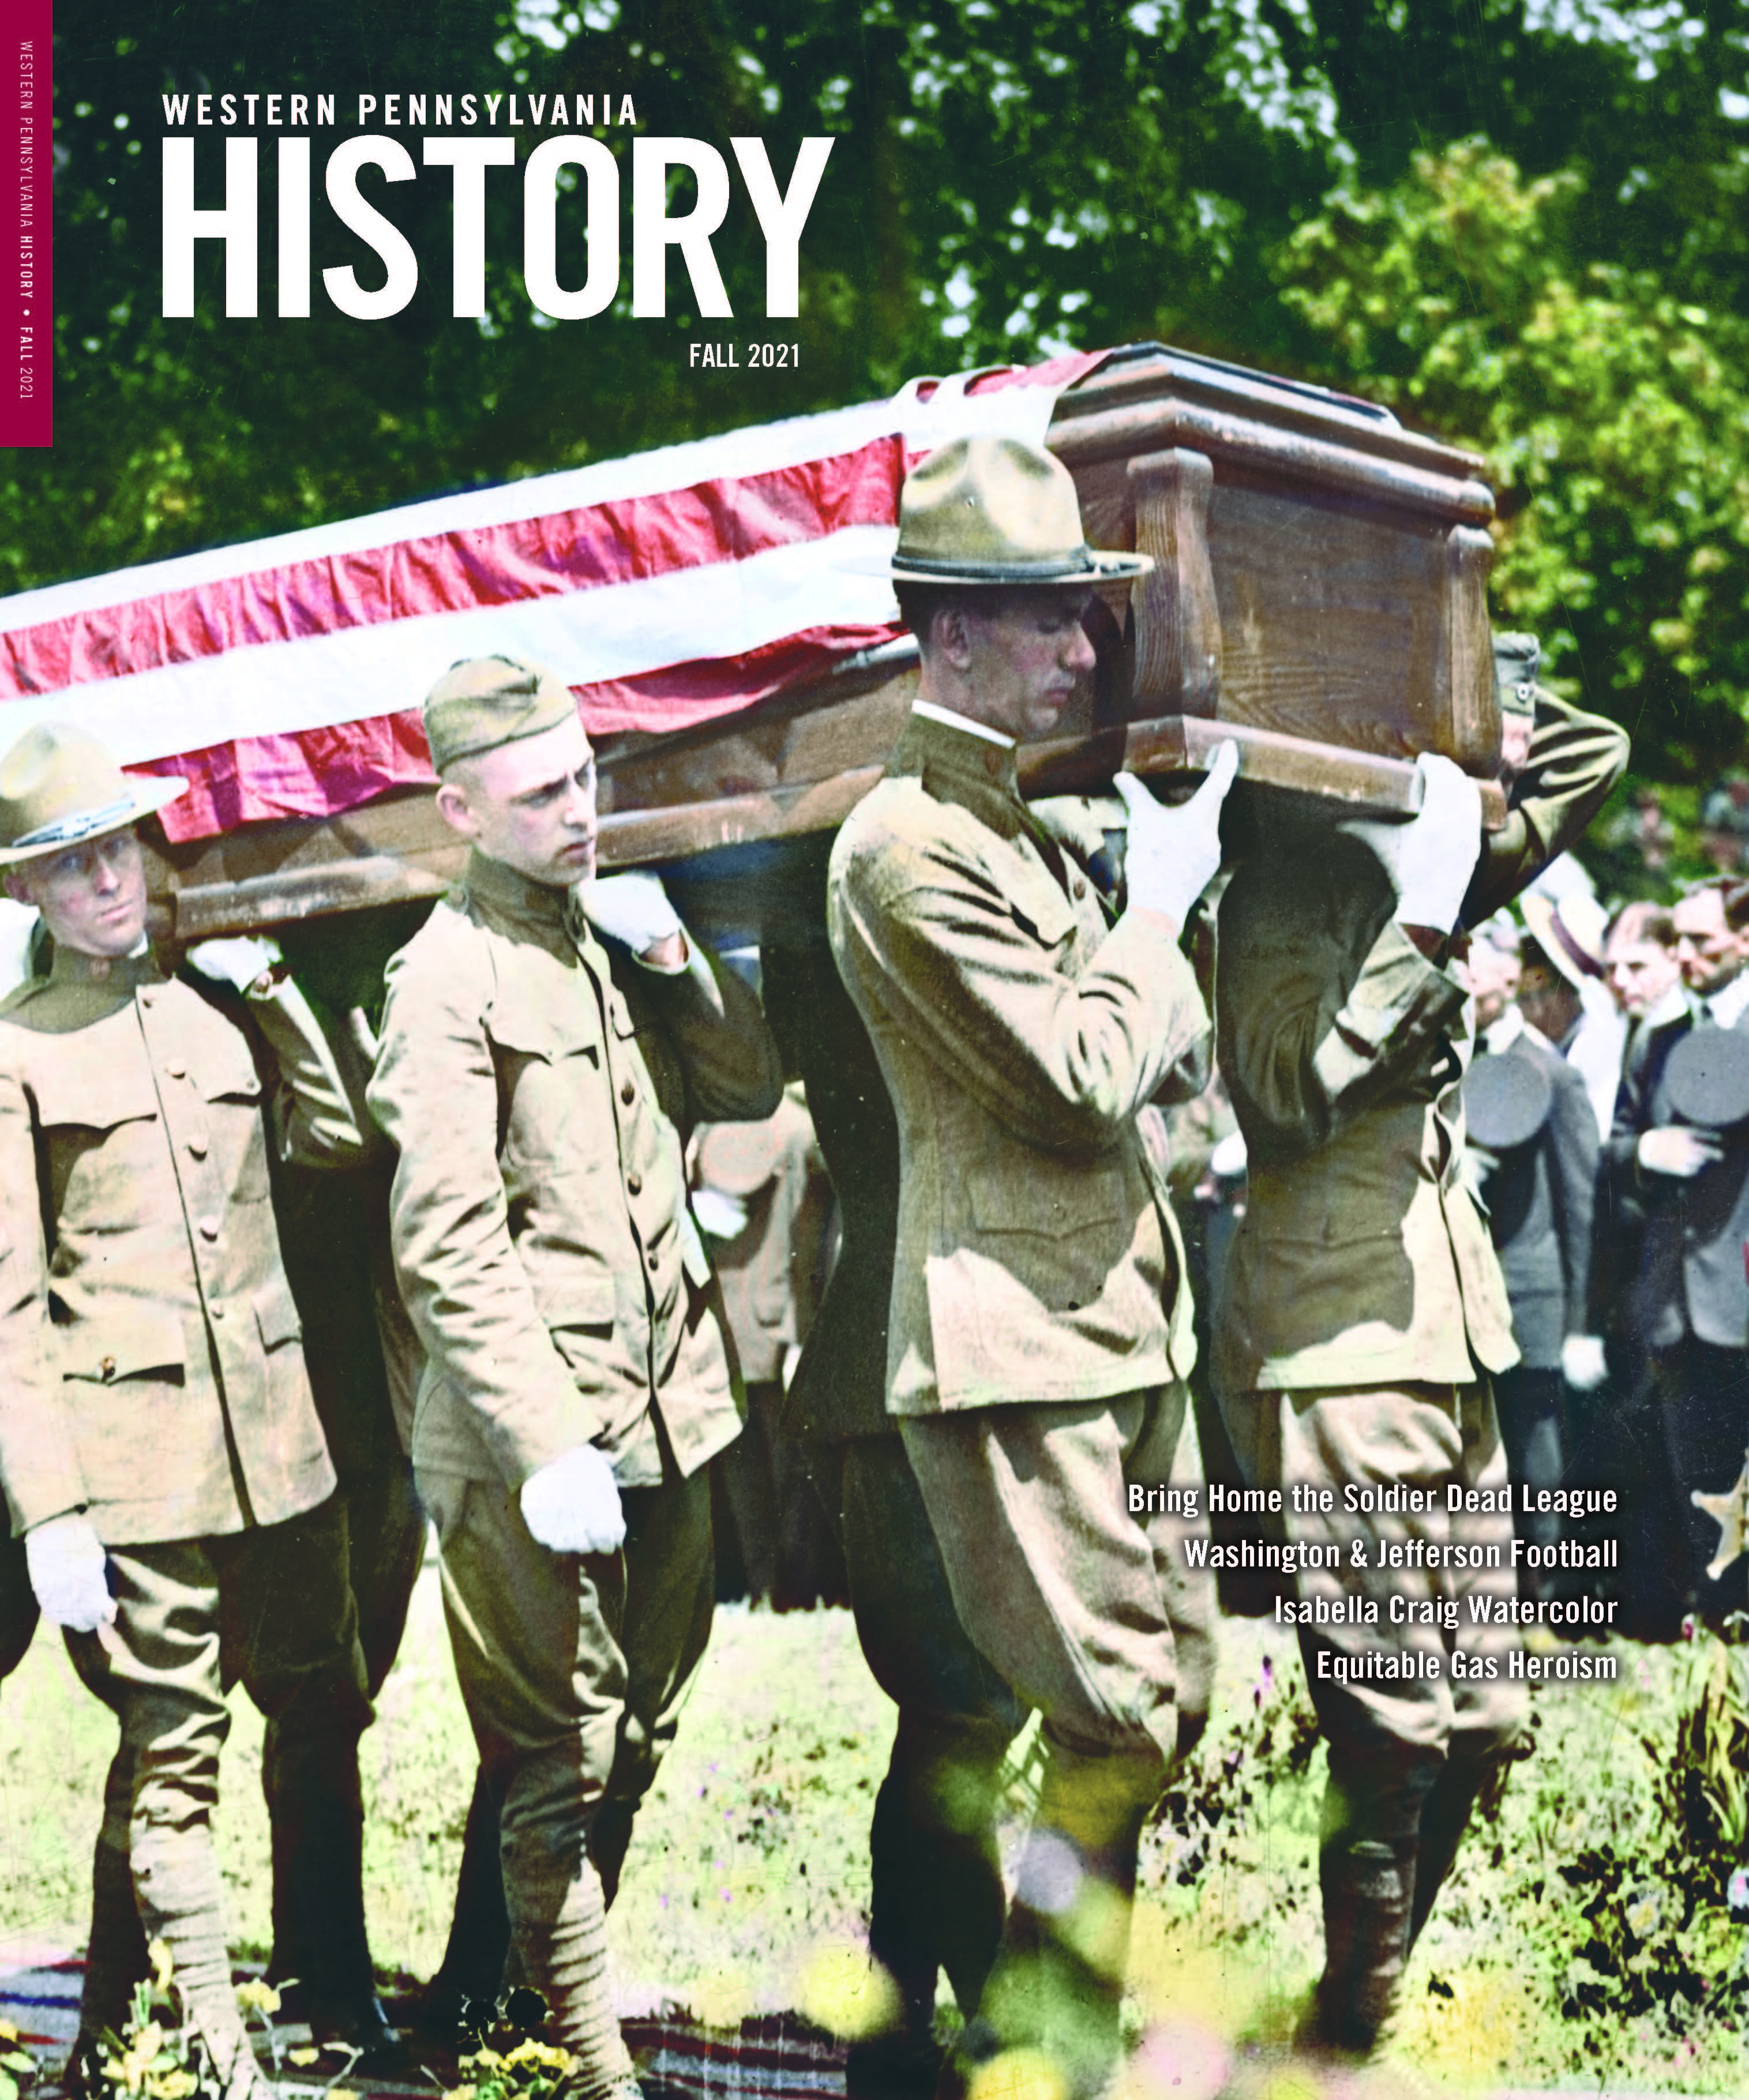 Magazine cover with photo of soldiers carrying a casket on their shoulders.